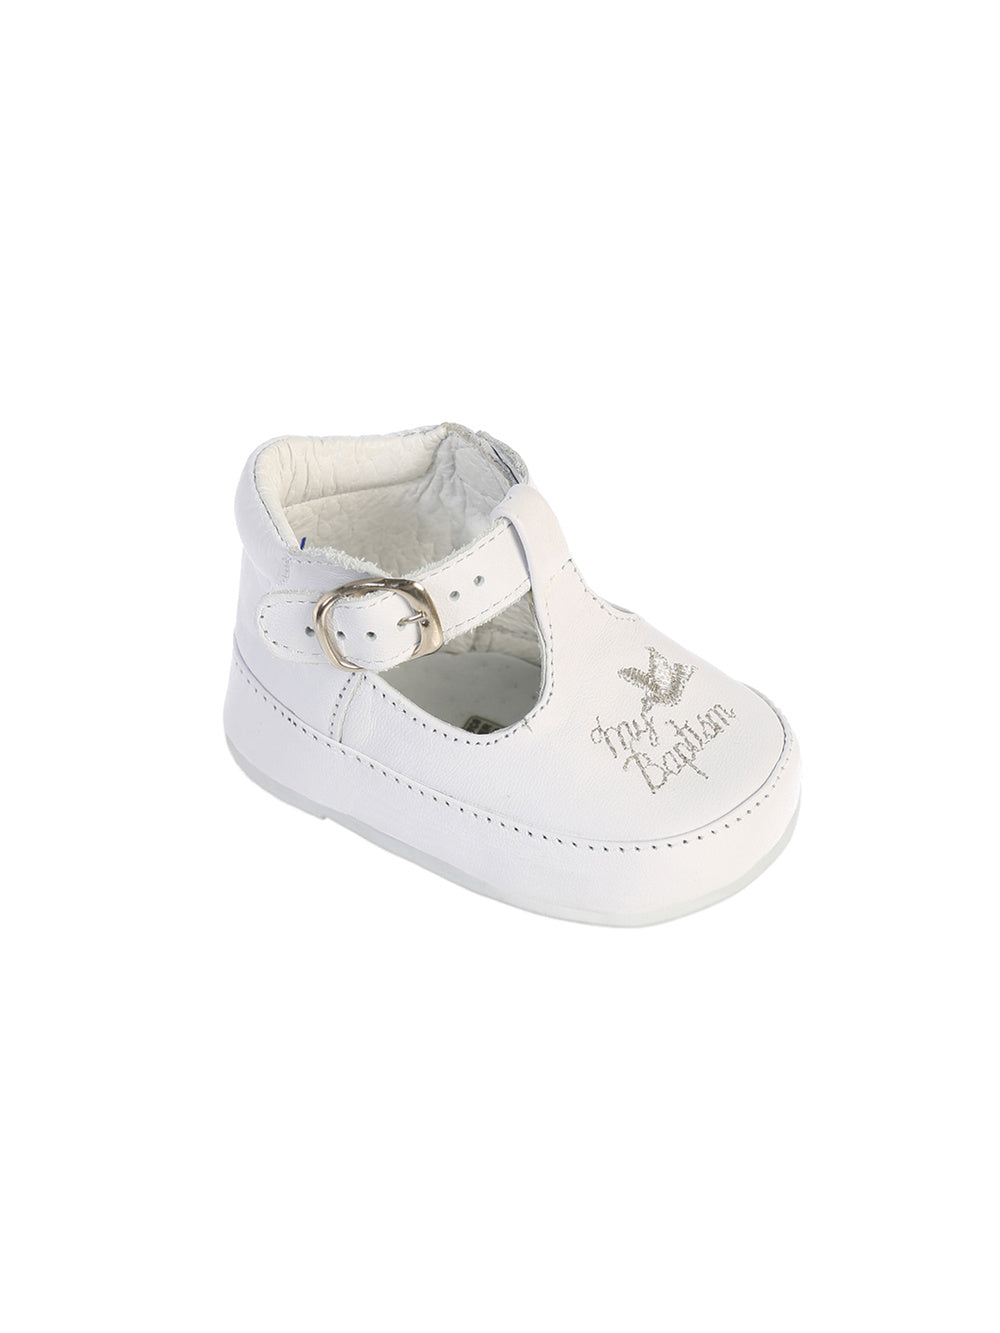 Girl's My Baptism embroidered Leather shoe with Rubber Sole